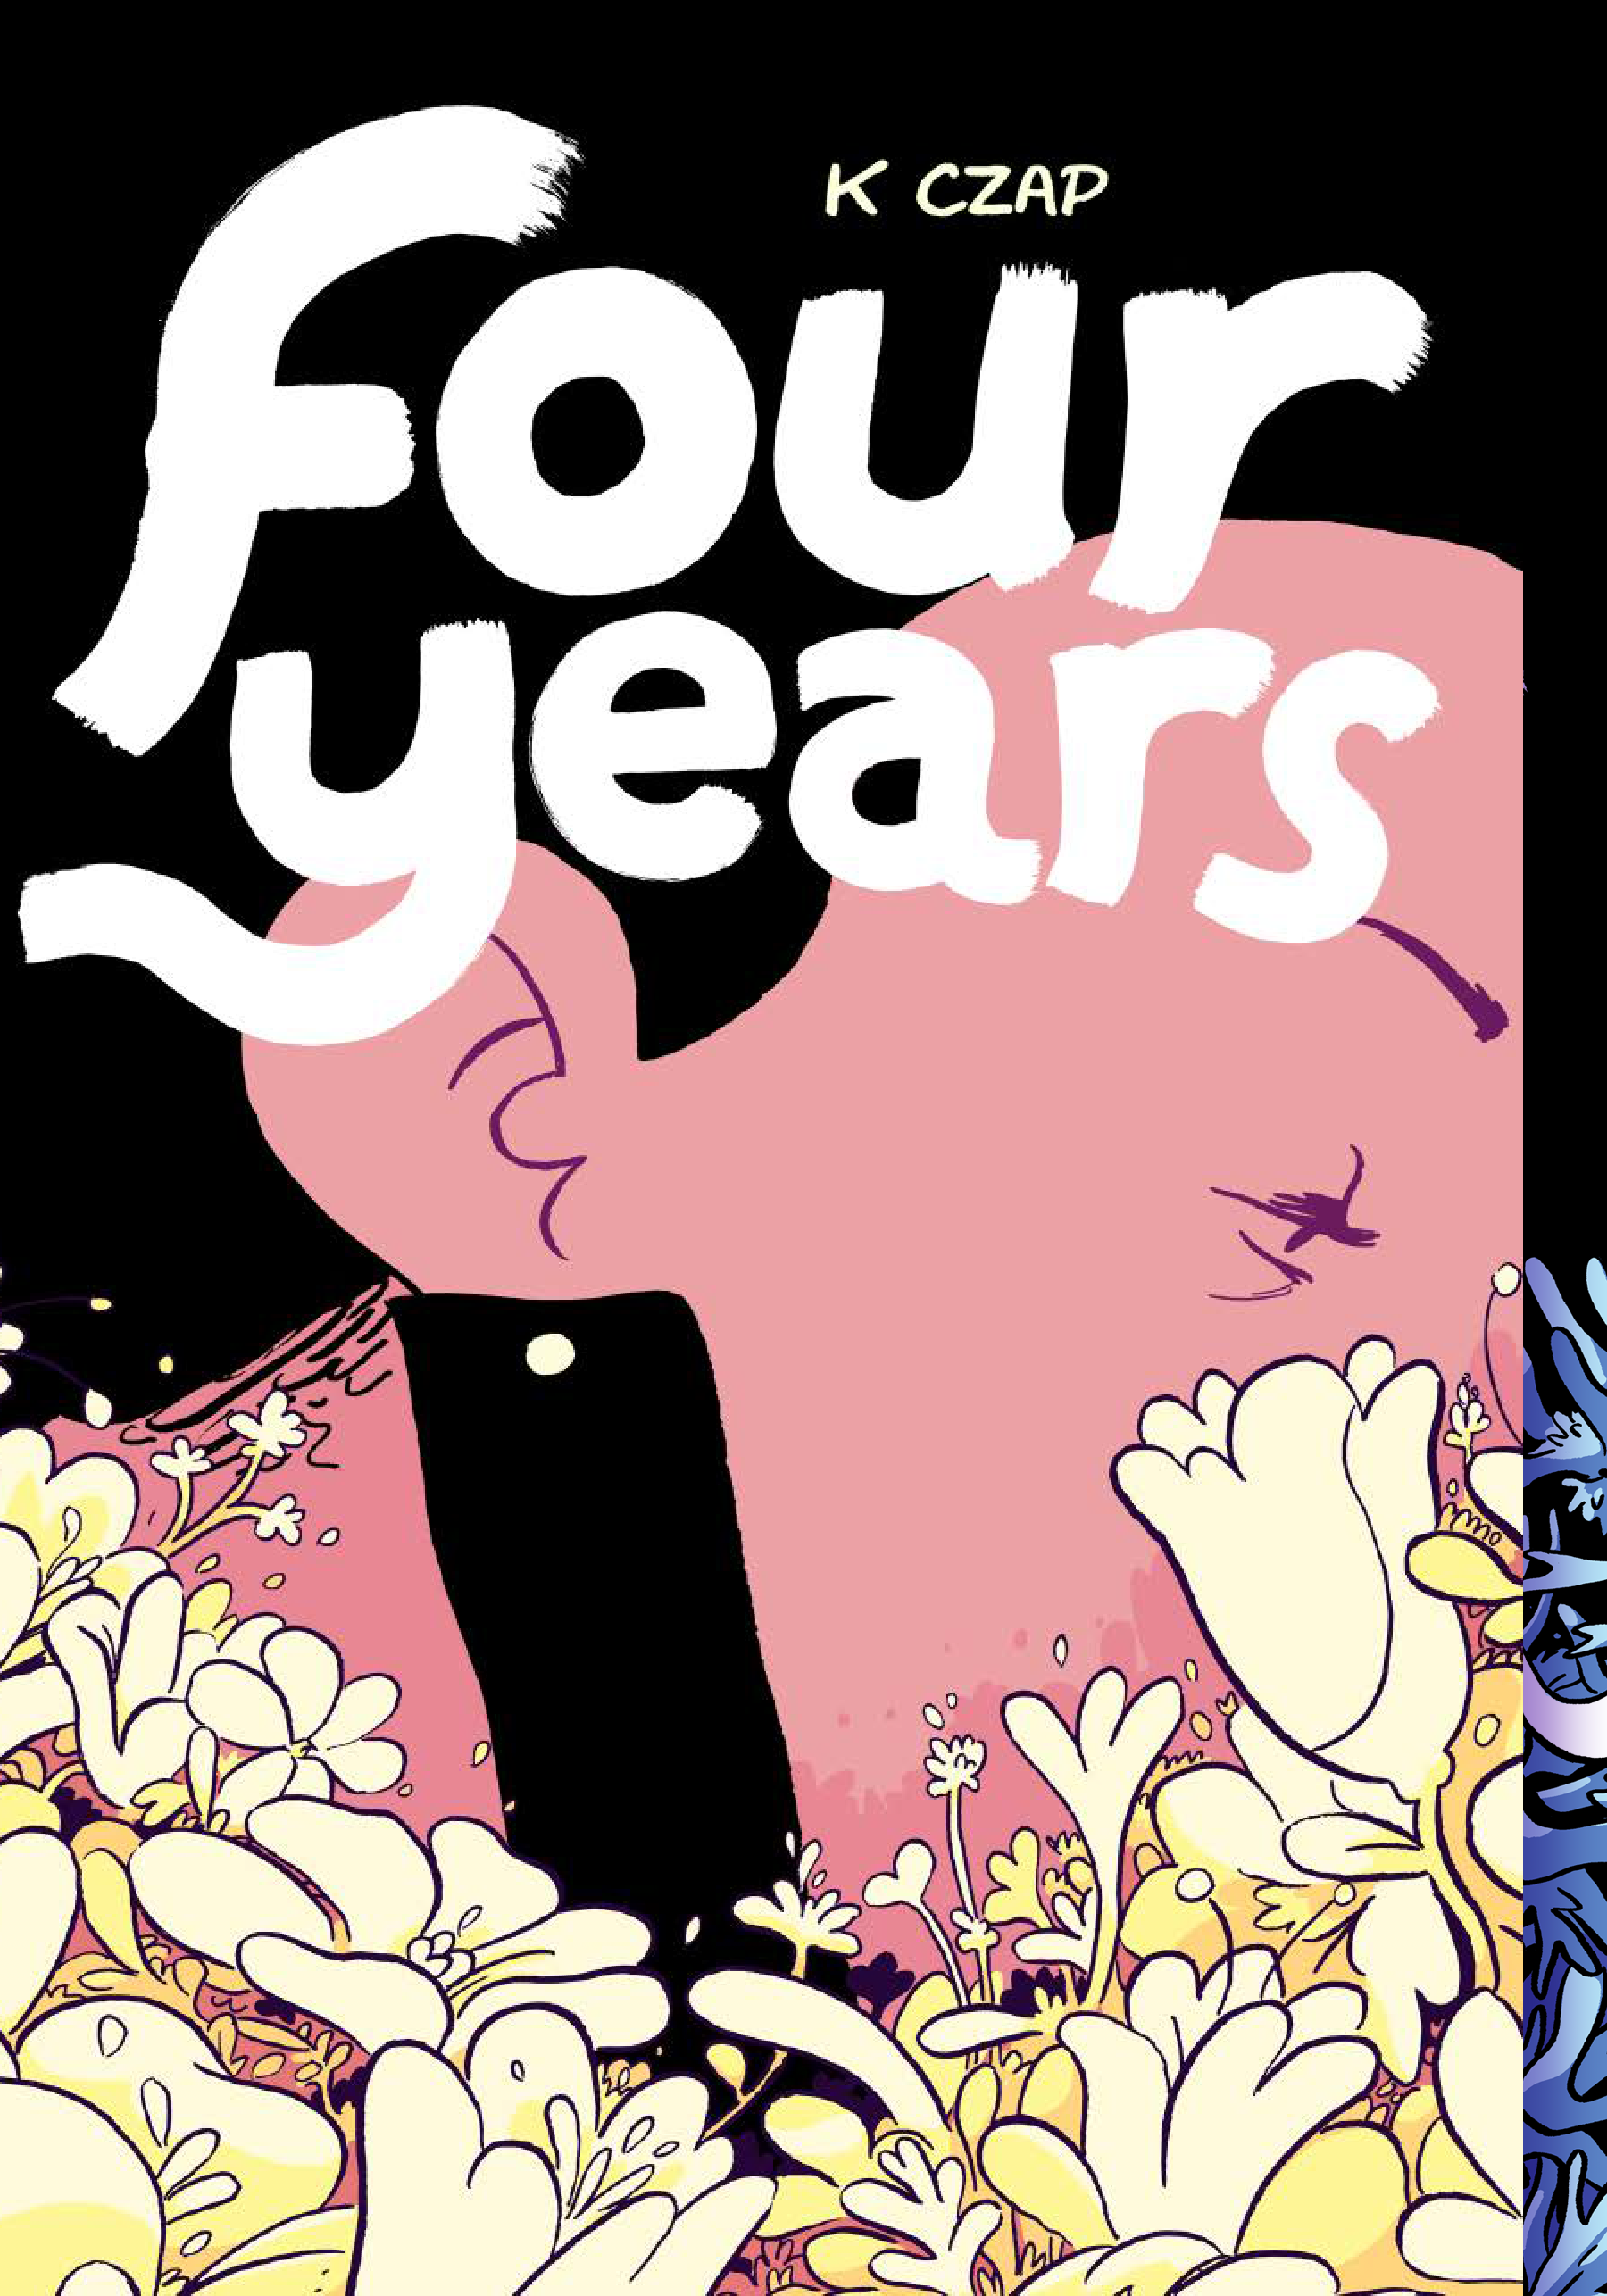 Four Years vol 1 by K Czap